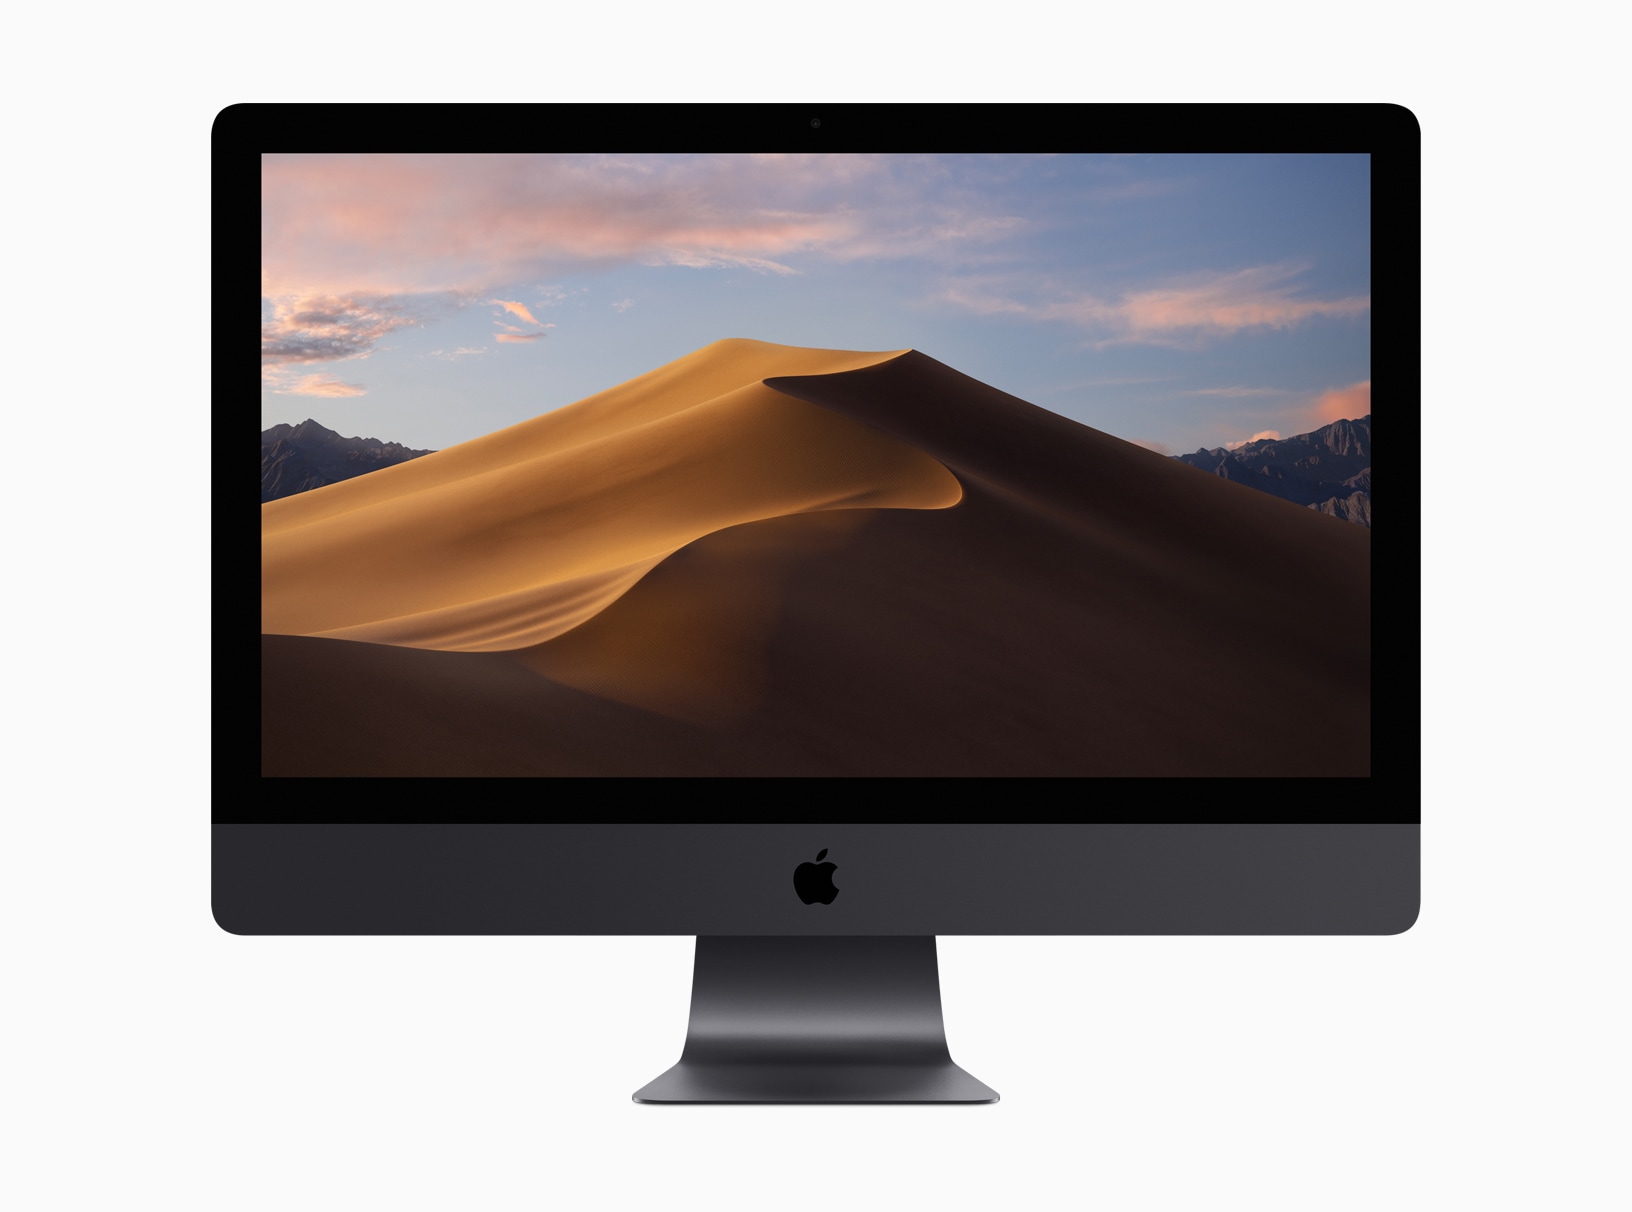 WWDC18: make way for macOS Mojave, with Dark Mode, a new App Store and… iOS apps (in a way)